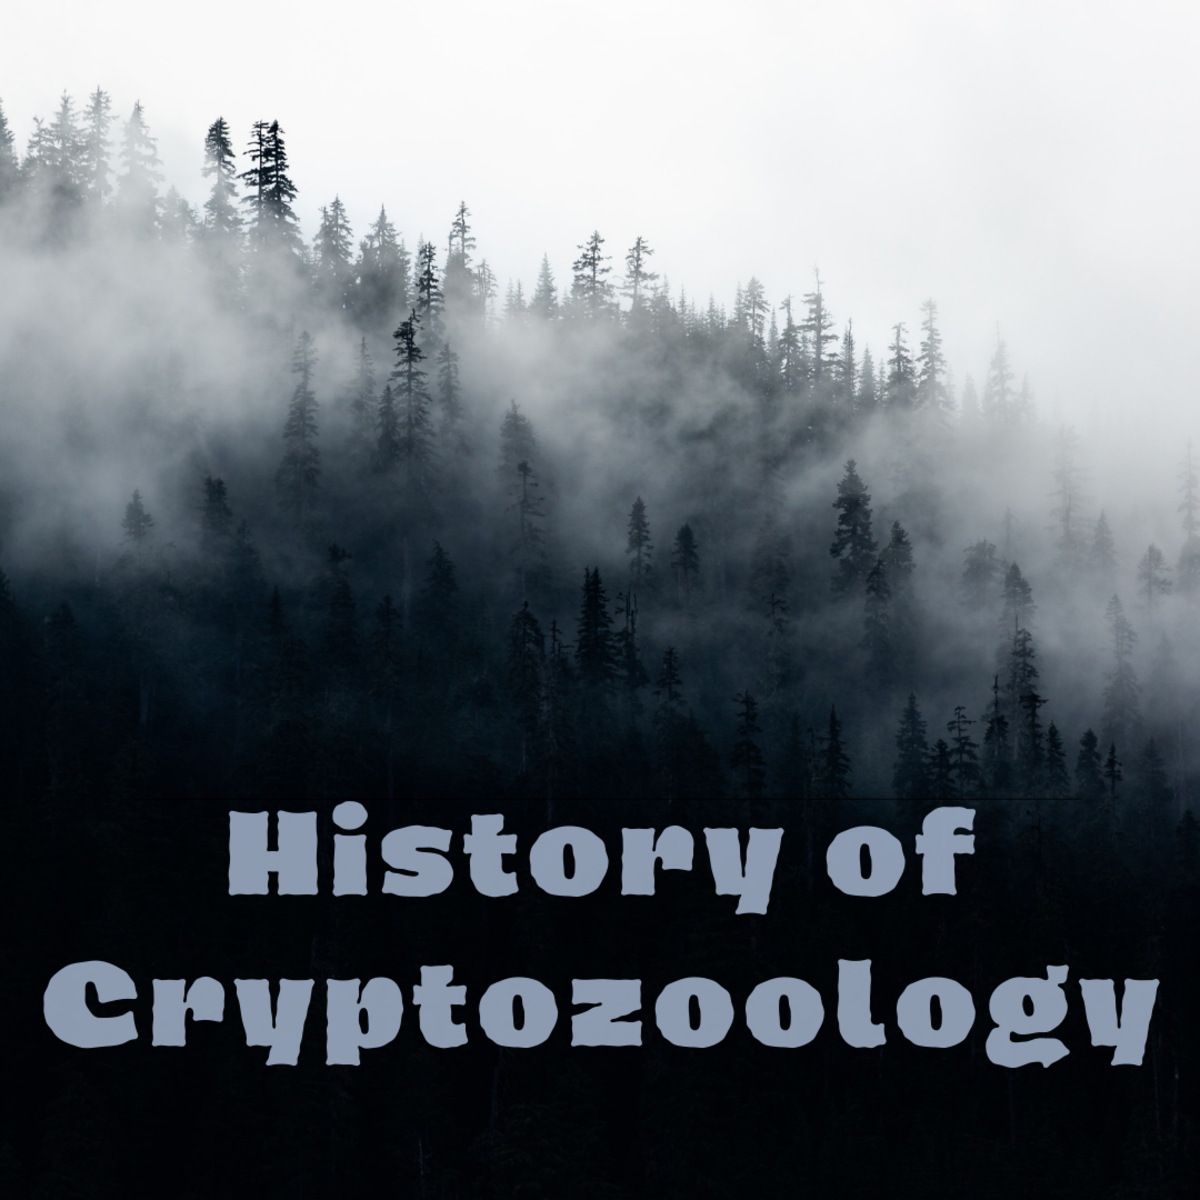 Cryptozoology is a mysterious and fascinating field.